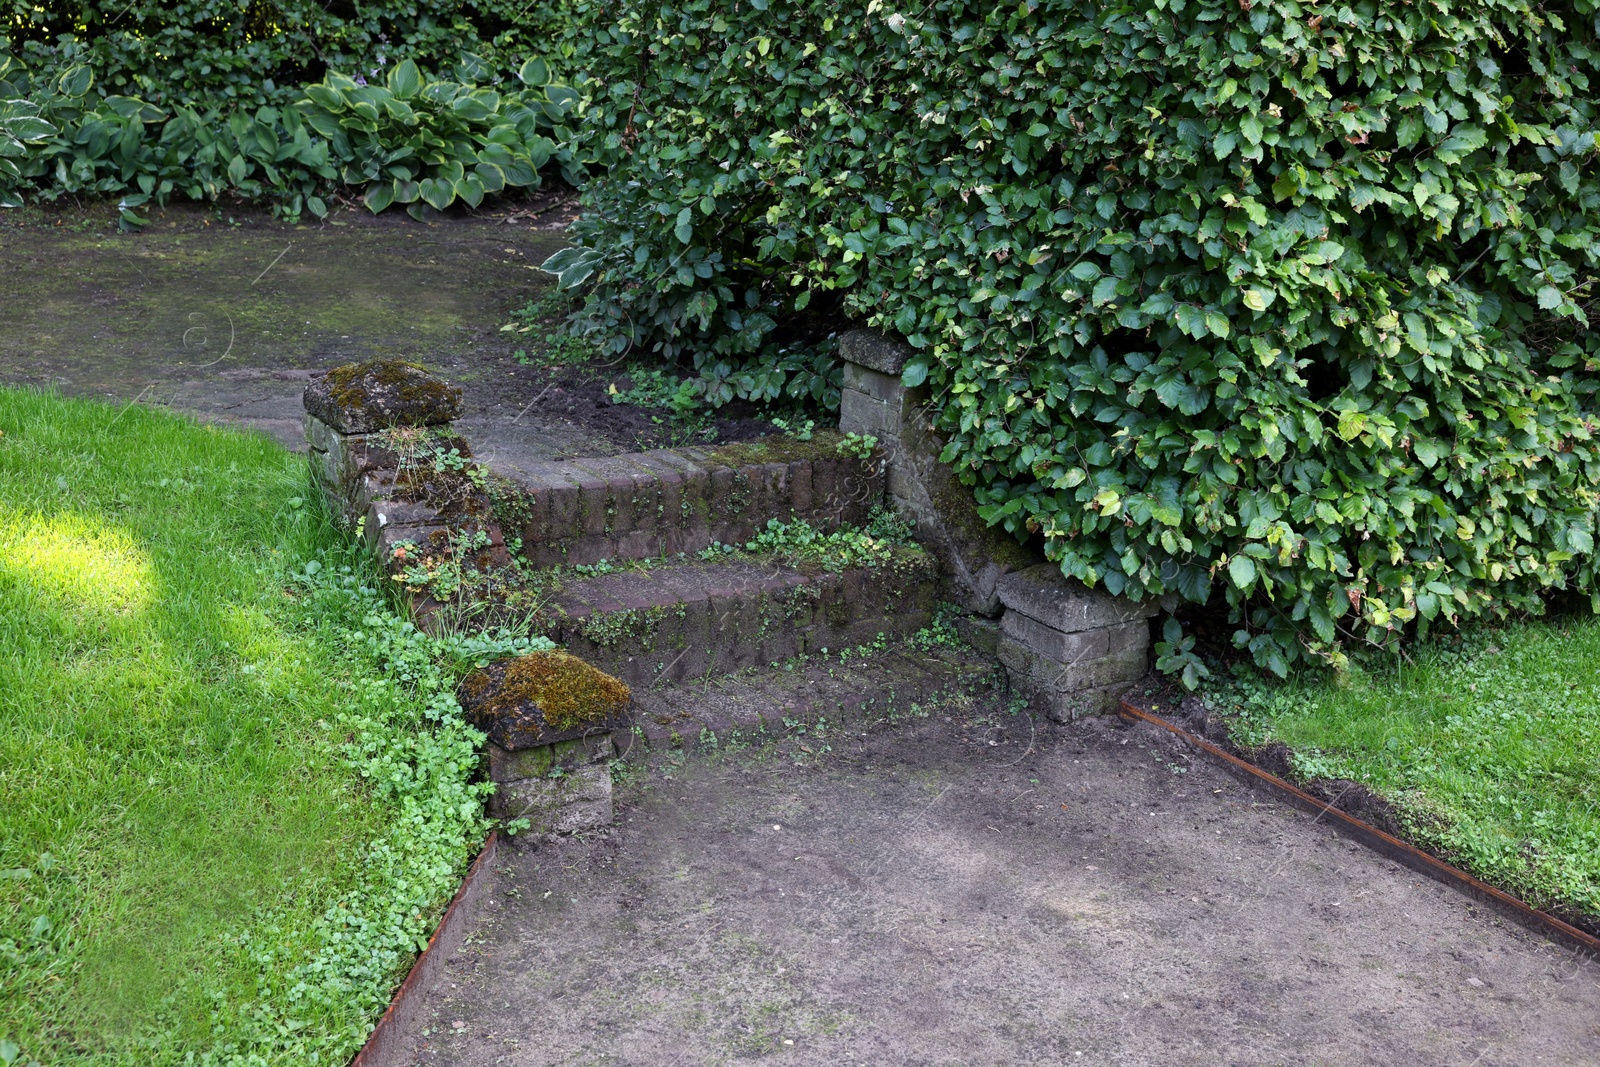 Photo of Old stone stairs and green plants outdoors